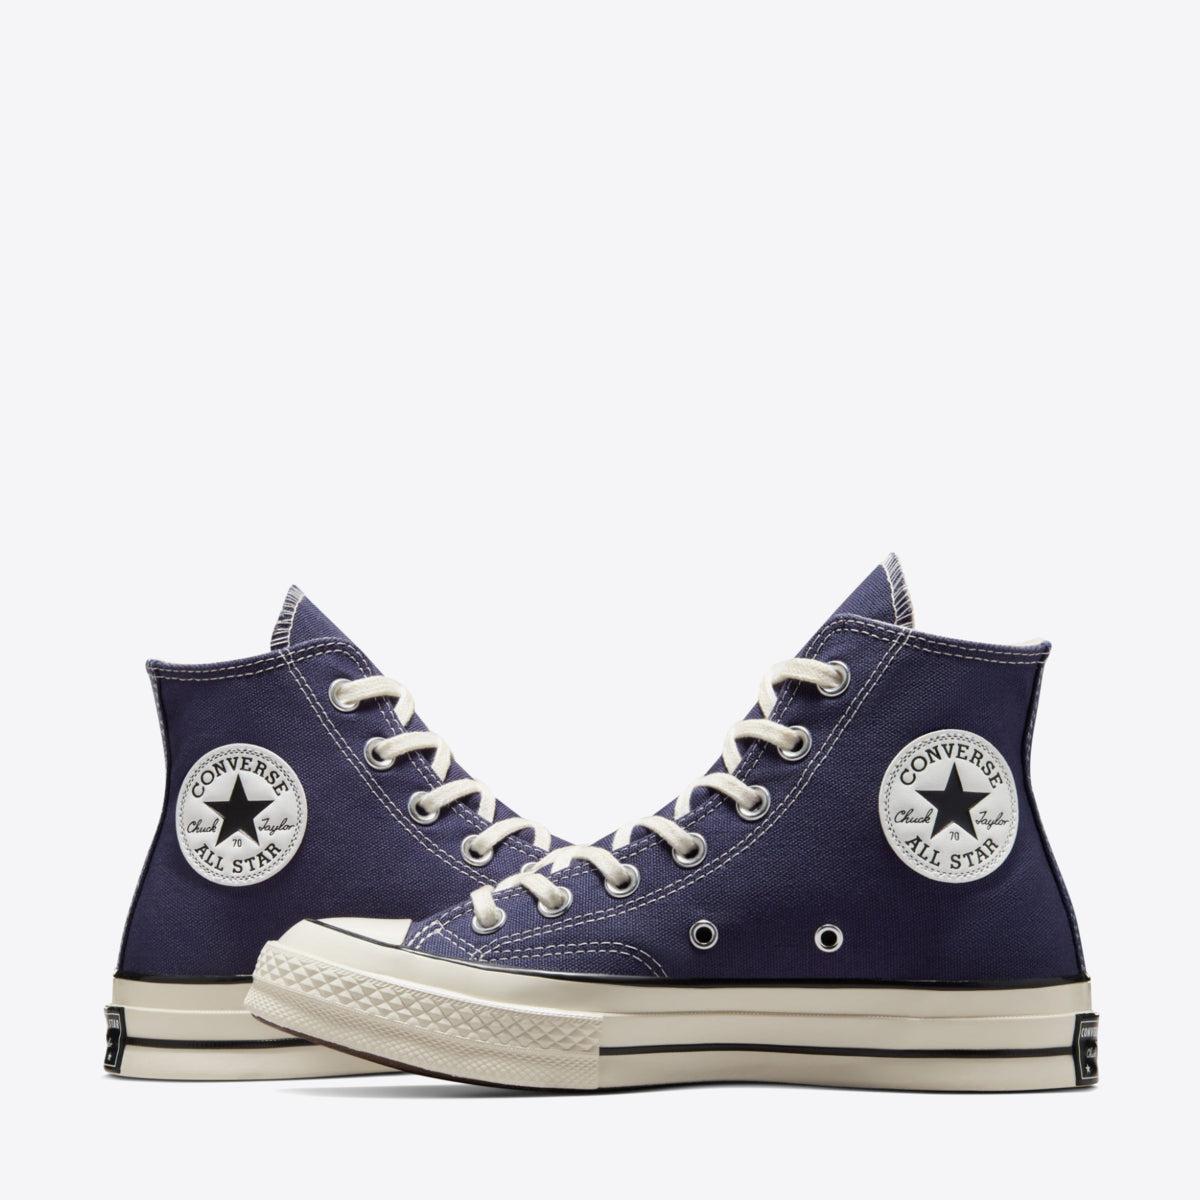 CONVERSE Chuck Taylor 70 Seasonal High Uncharted Waters/Egret - Image 8